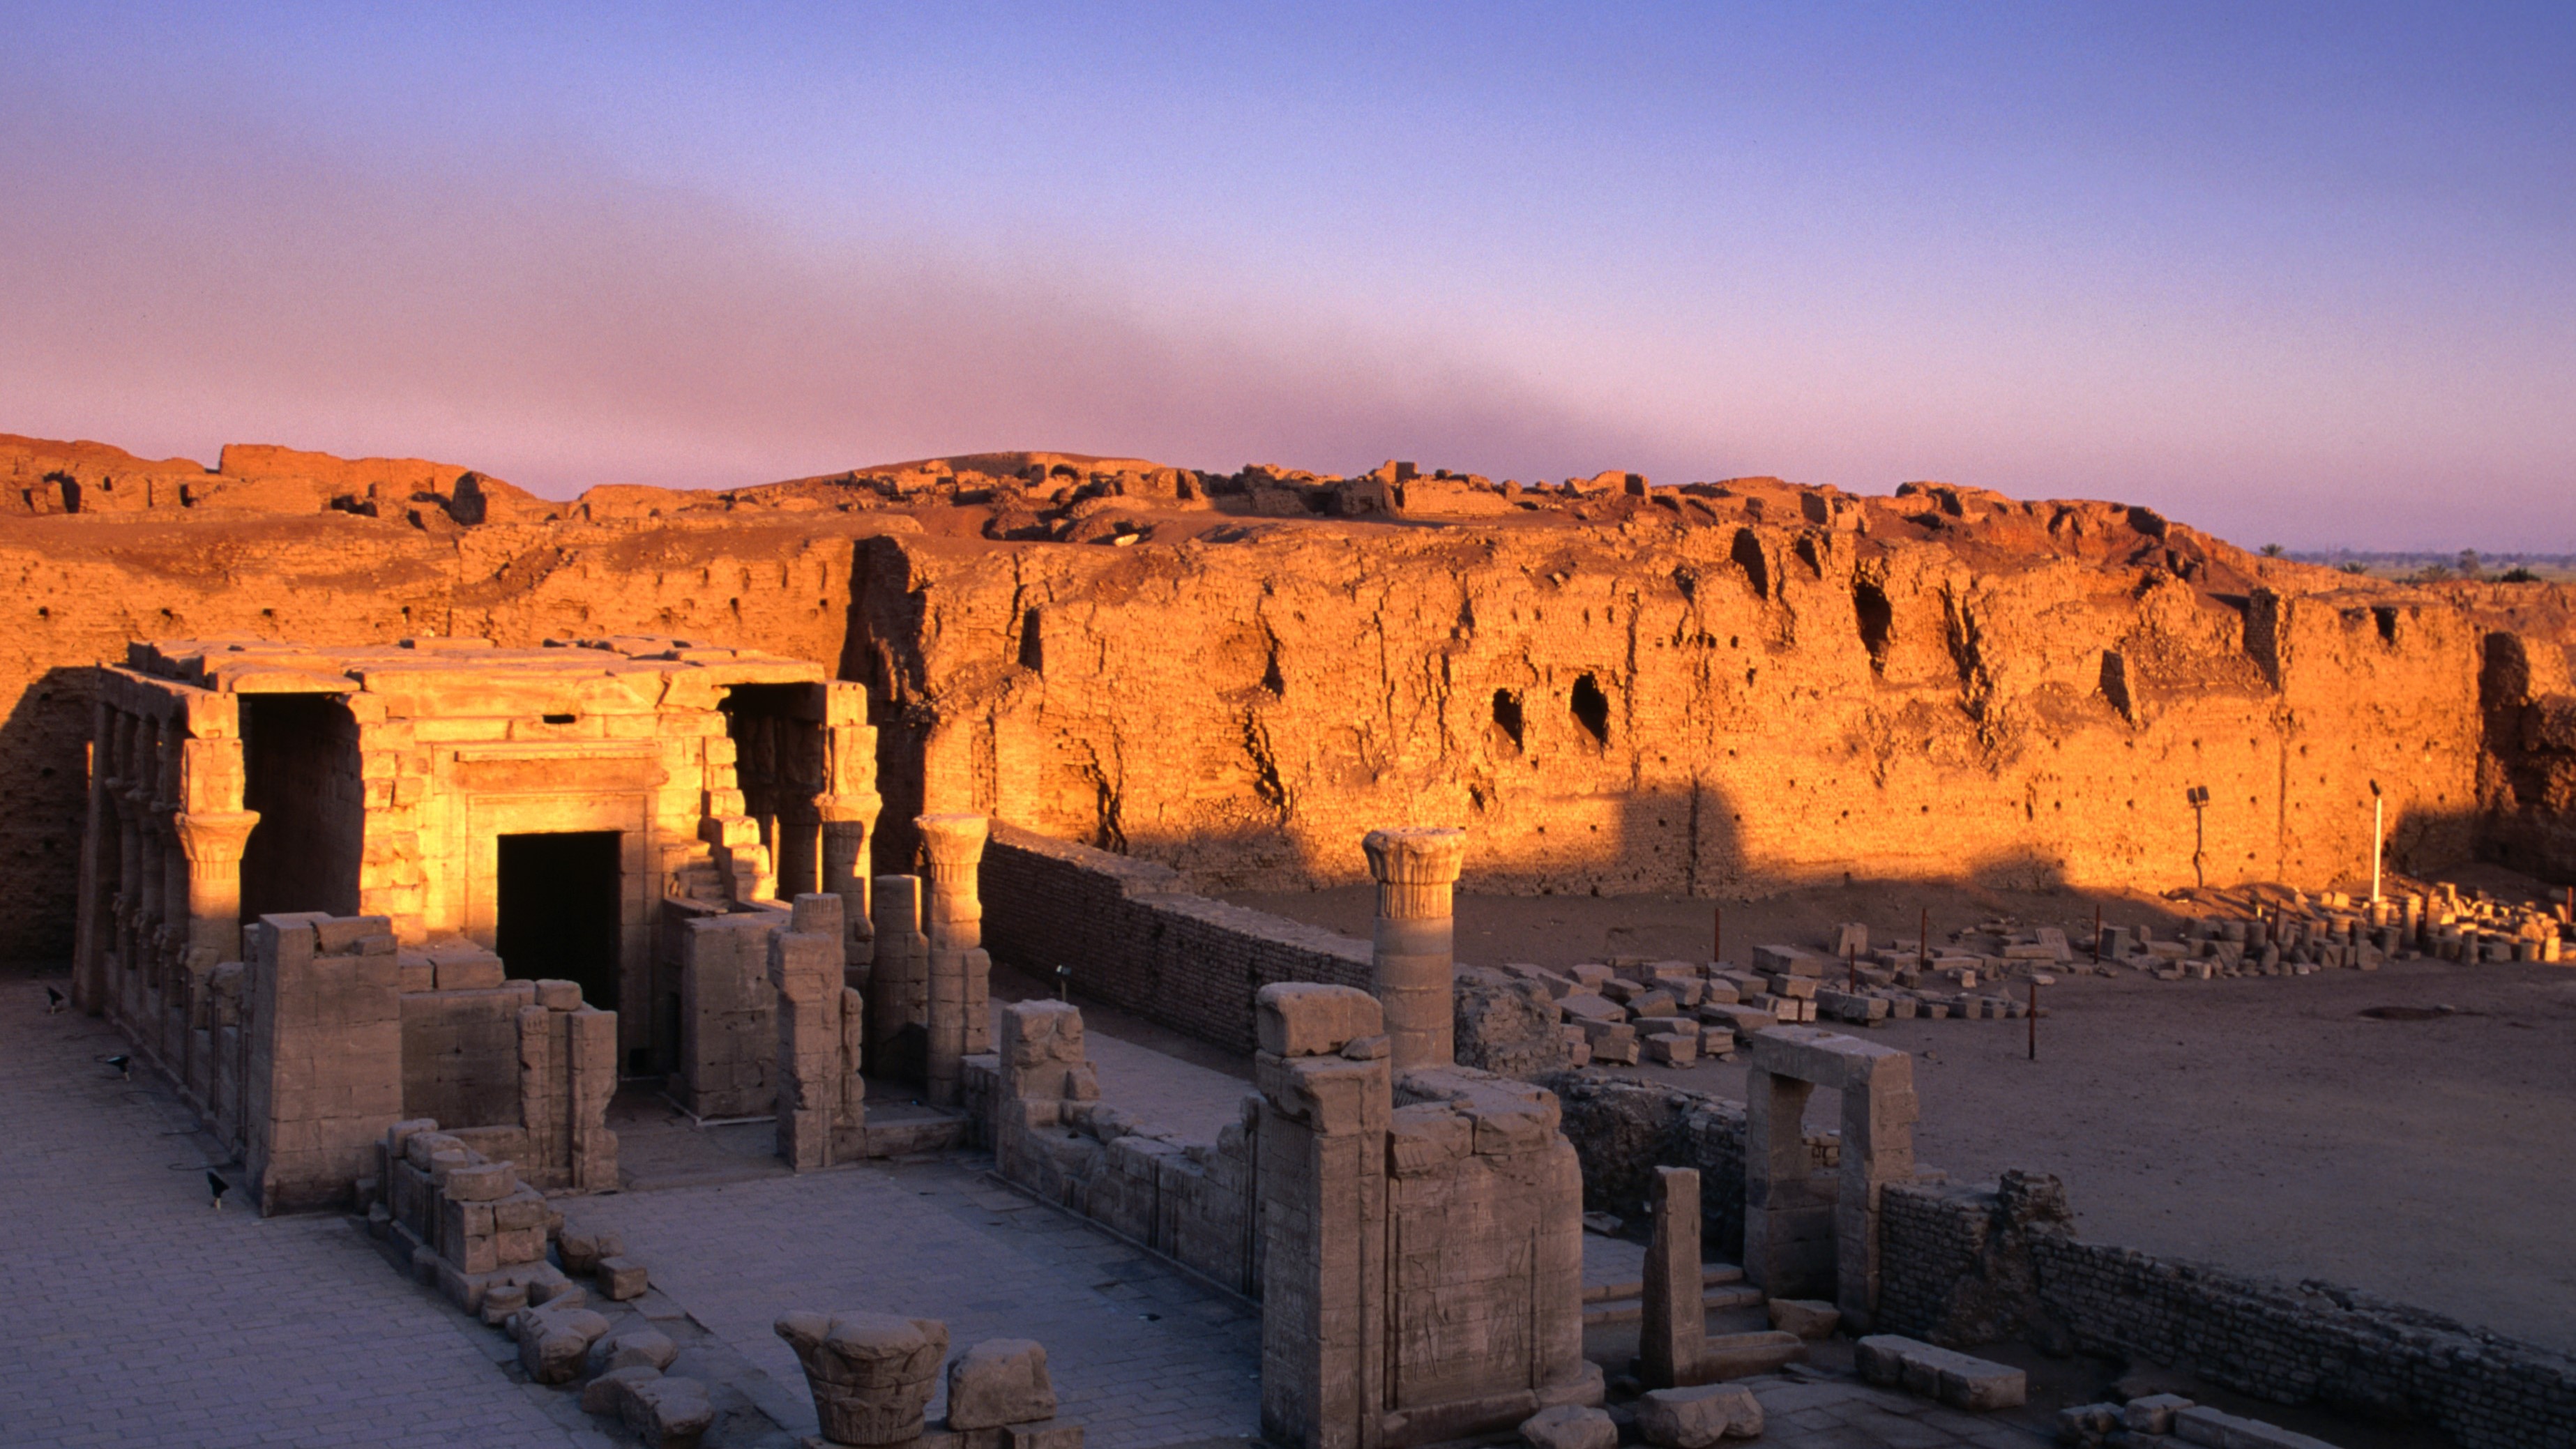 Sunrise starts to awaken the ruins of the small temple in front of the already lit grander remains of the Horus Temple.